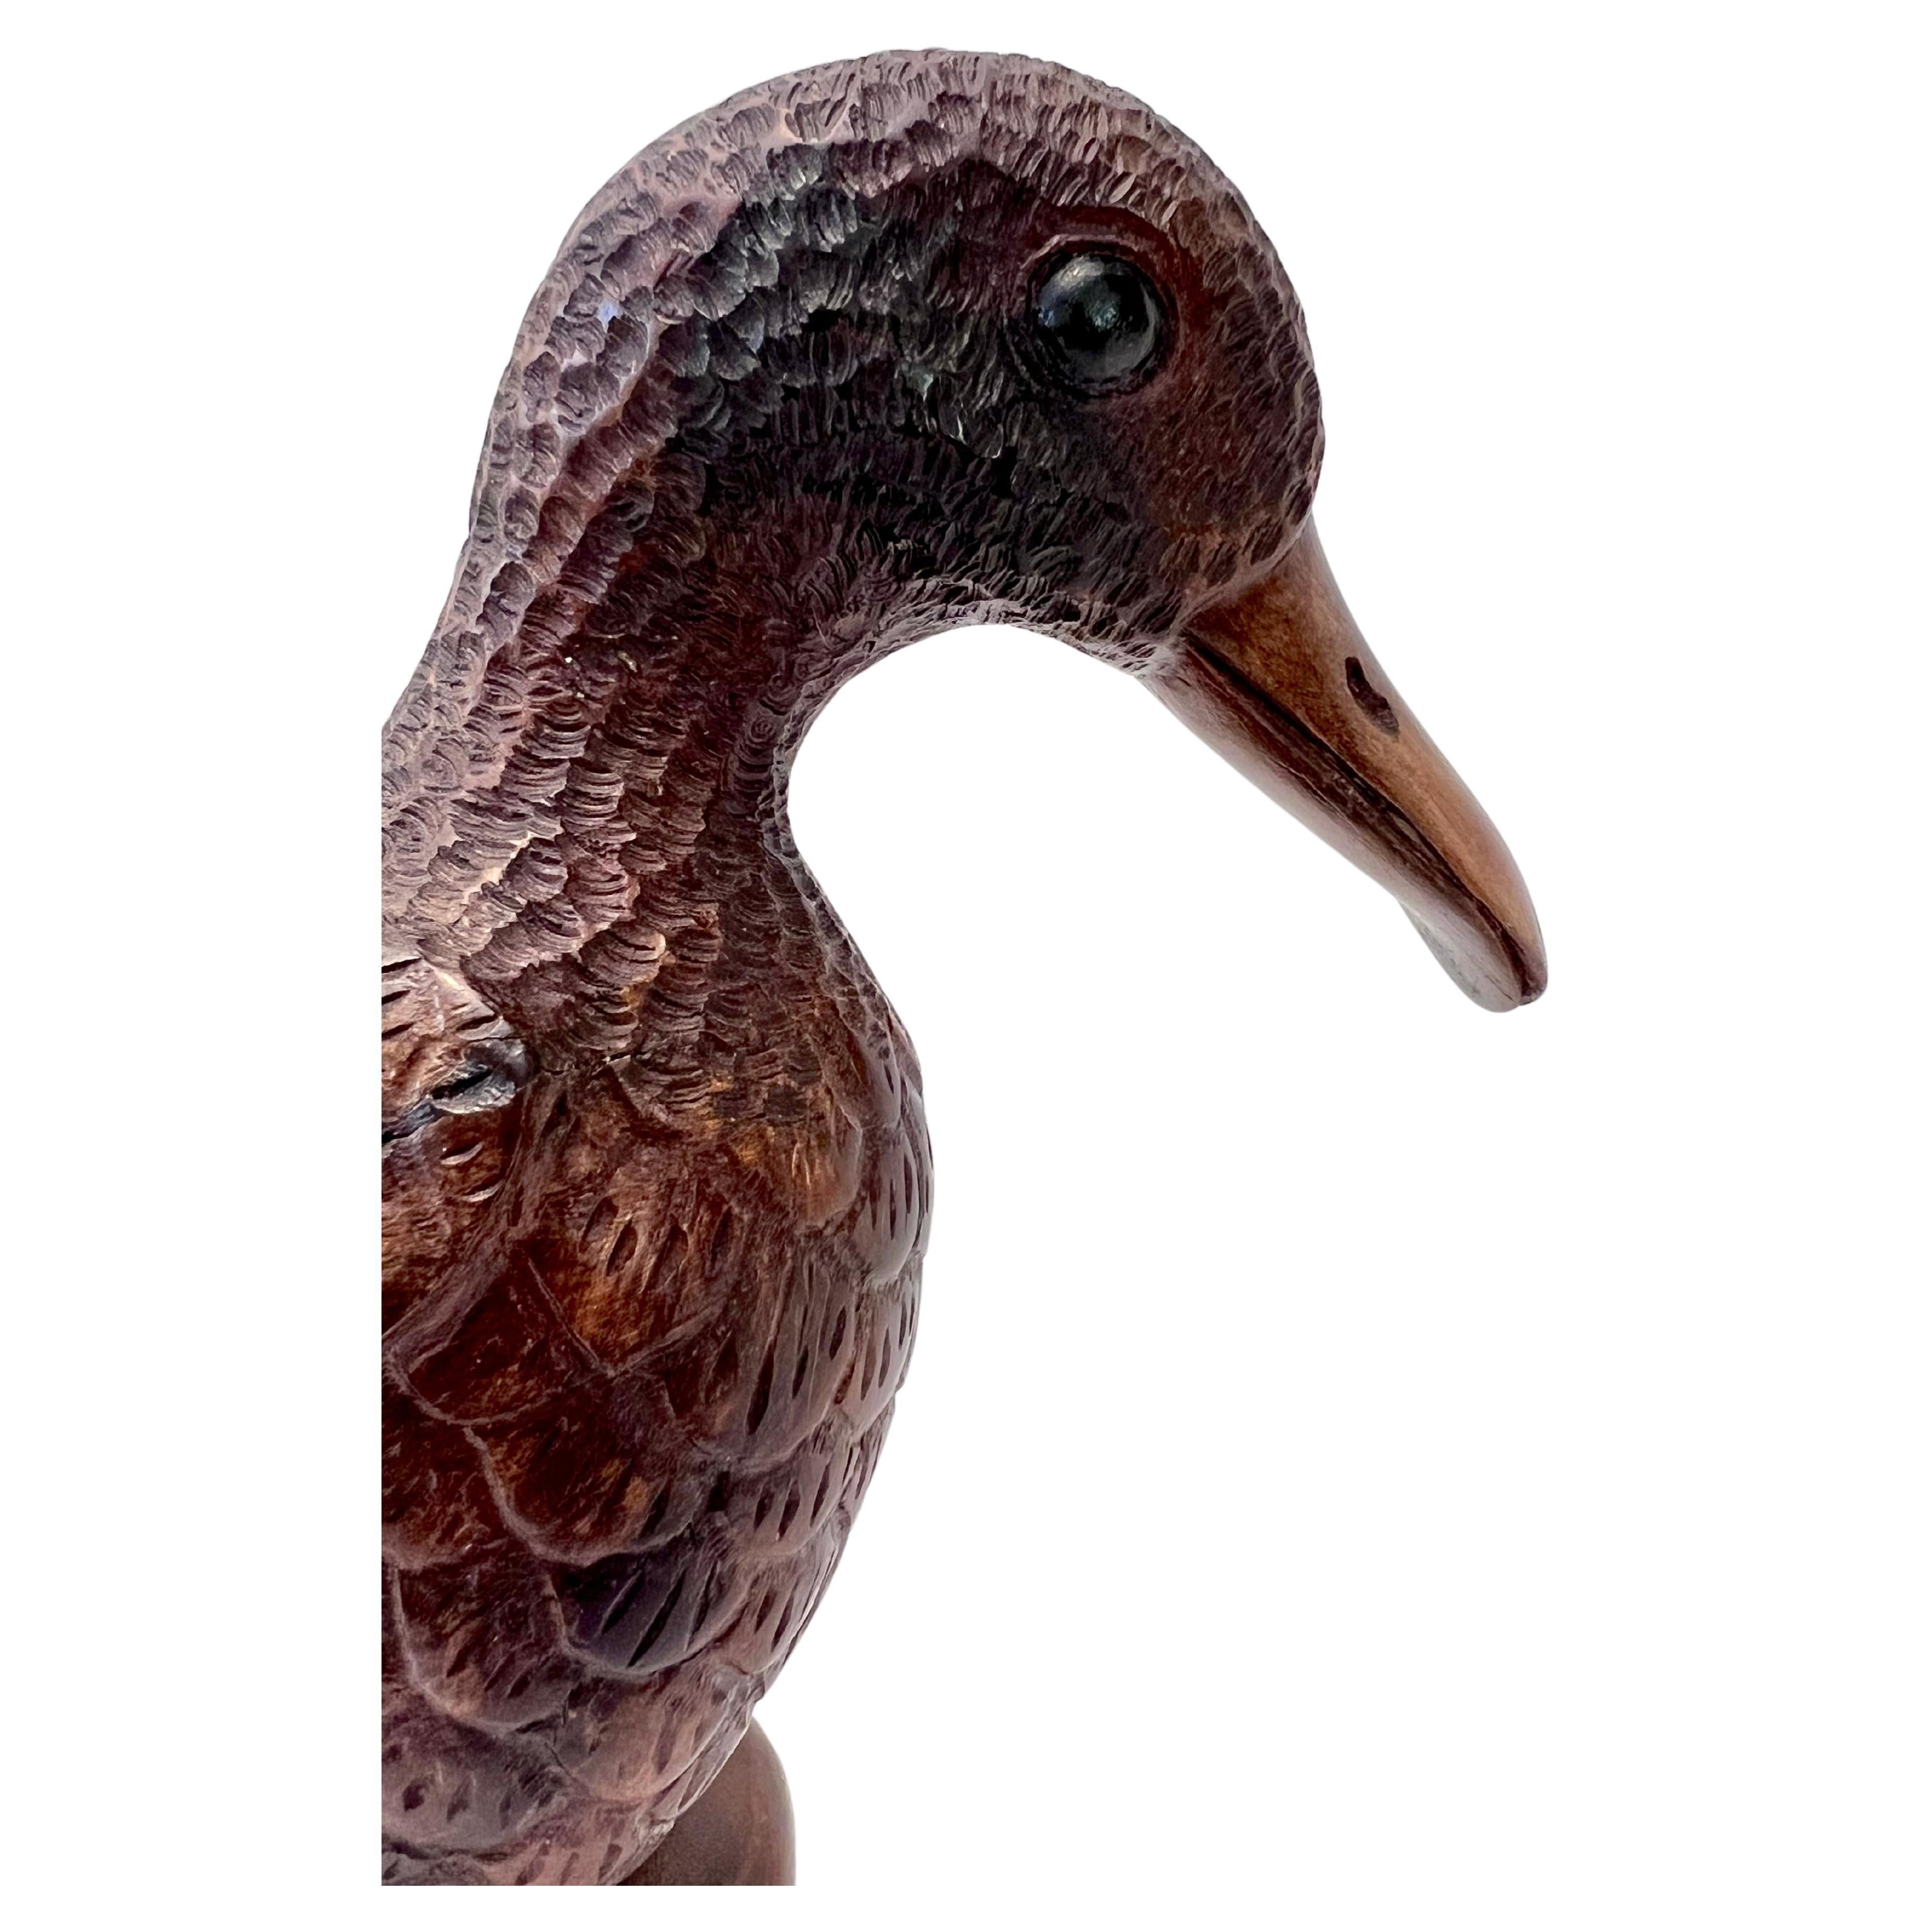 Hand Carved Duck Sculpture from DriftWood For Sale 2